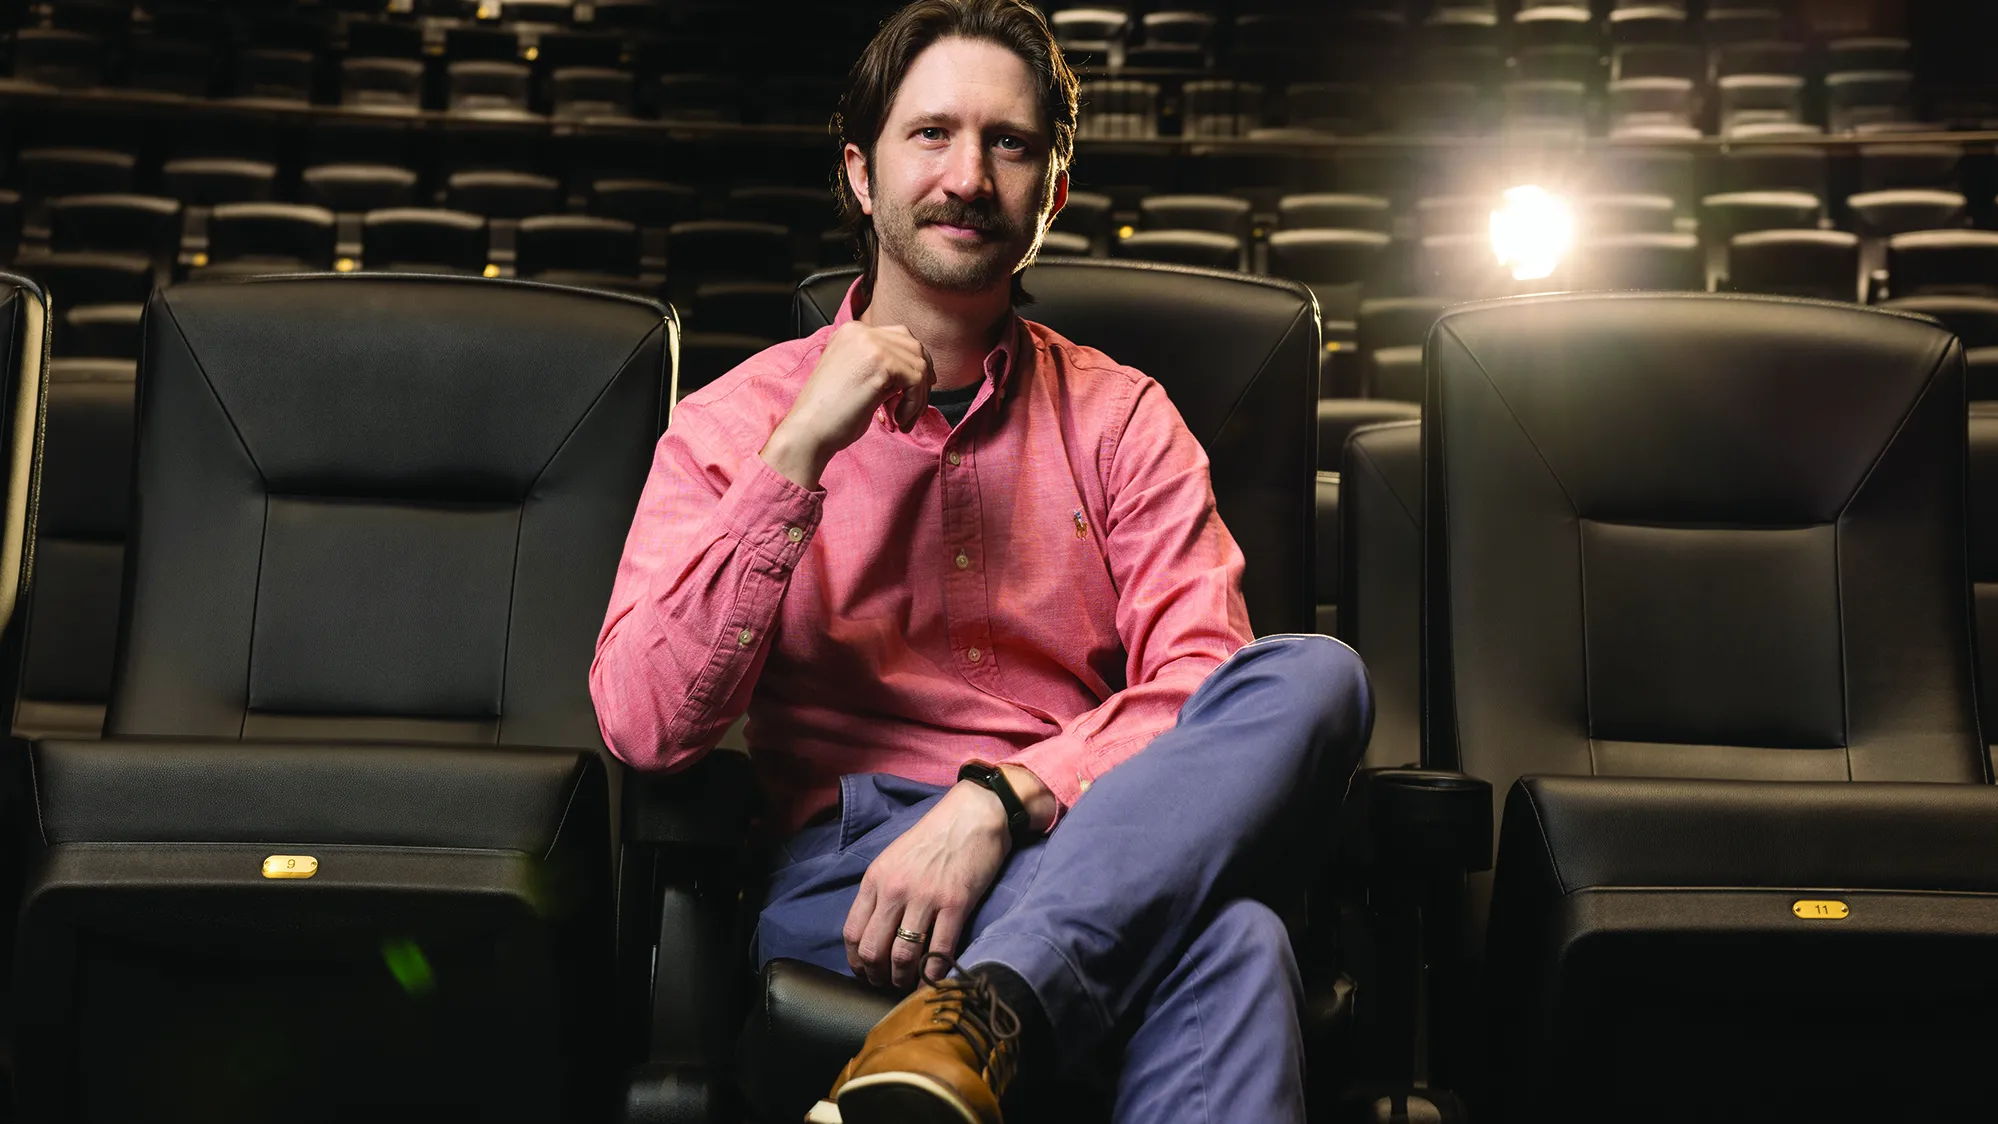 Sitting in a theater with leather seats, Matthew Grizzard, a bearded white man wearing khakis and a button down, sits relaxed with one leg crossed over the other and his hands seeming as if he’s focusing as he listens. He’s smiling with his eyes more than his mouth.